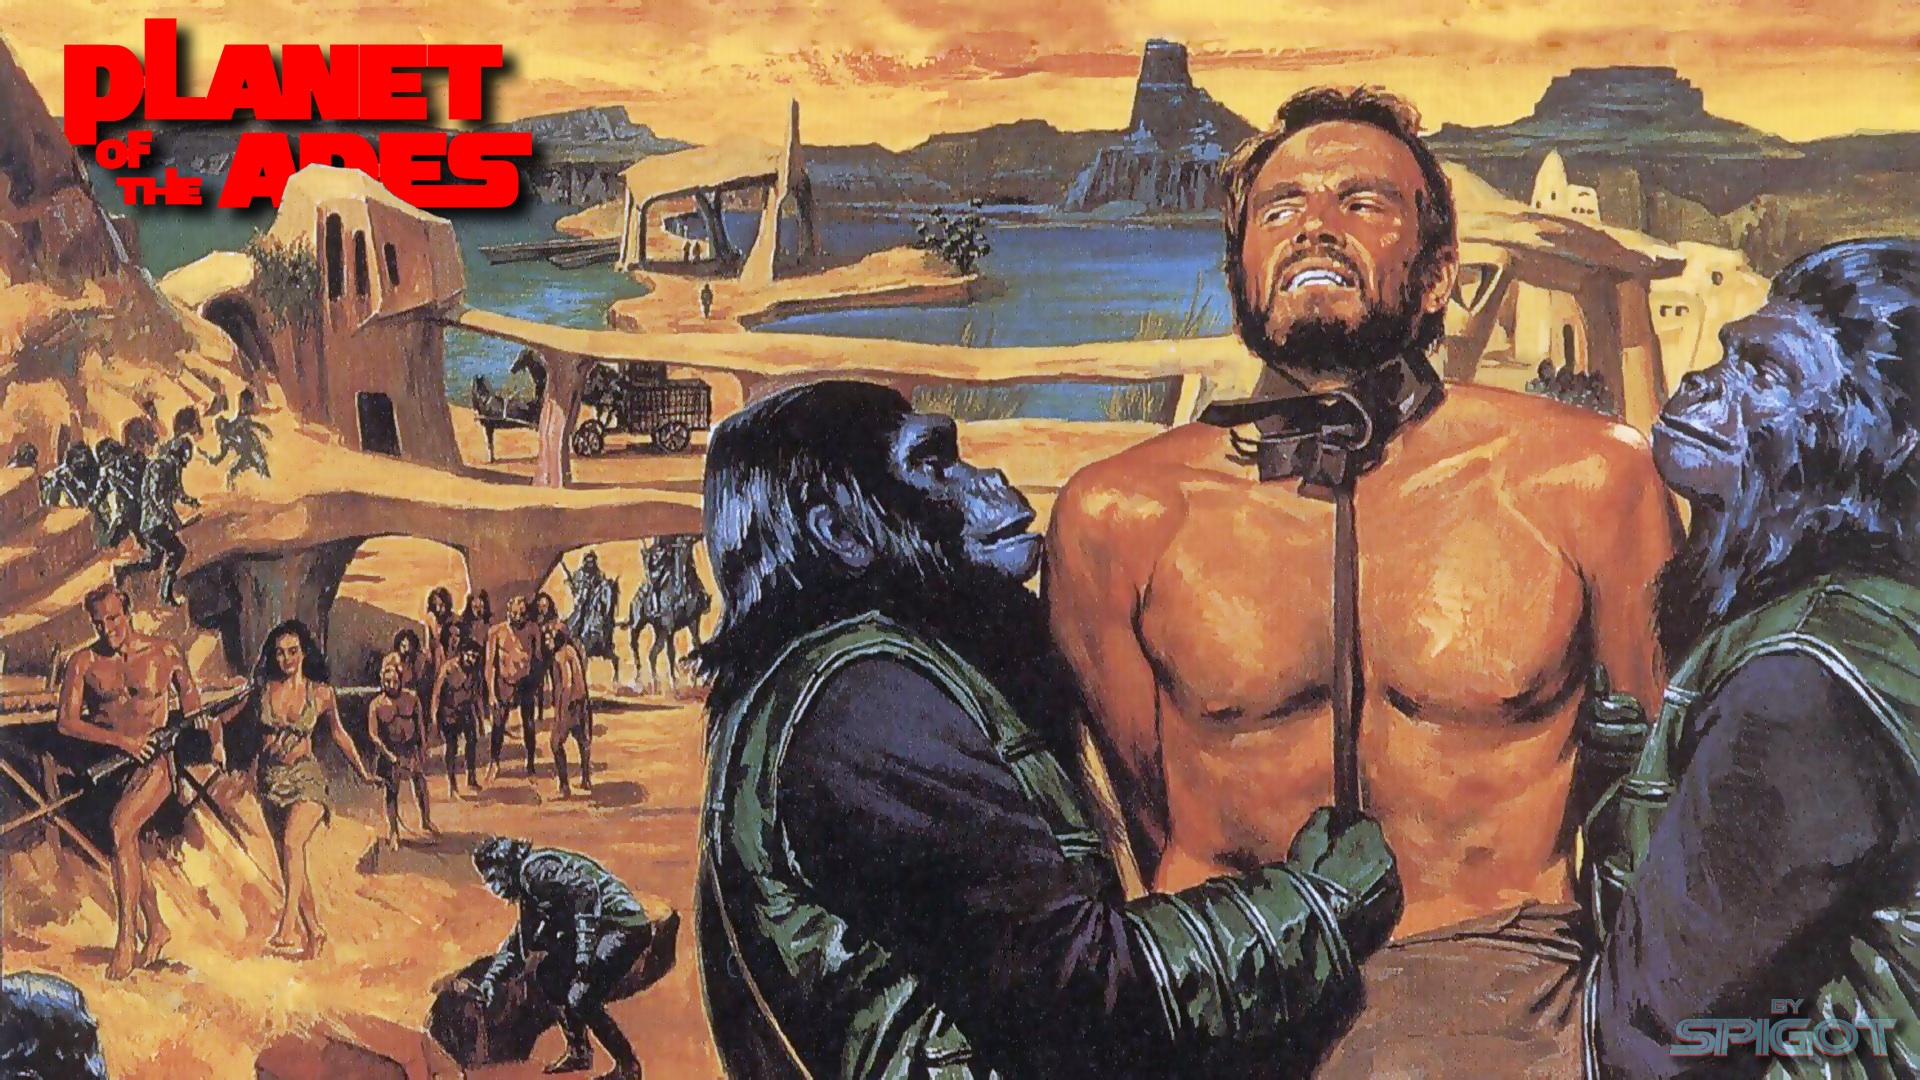 Planet of the Apes (1968) Blu-ray Steelbook is a Zavvi Exclusive